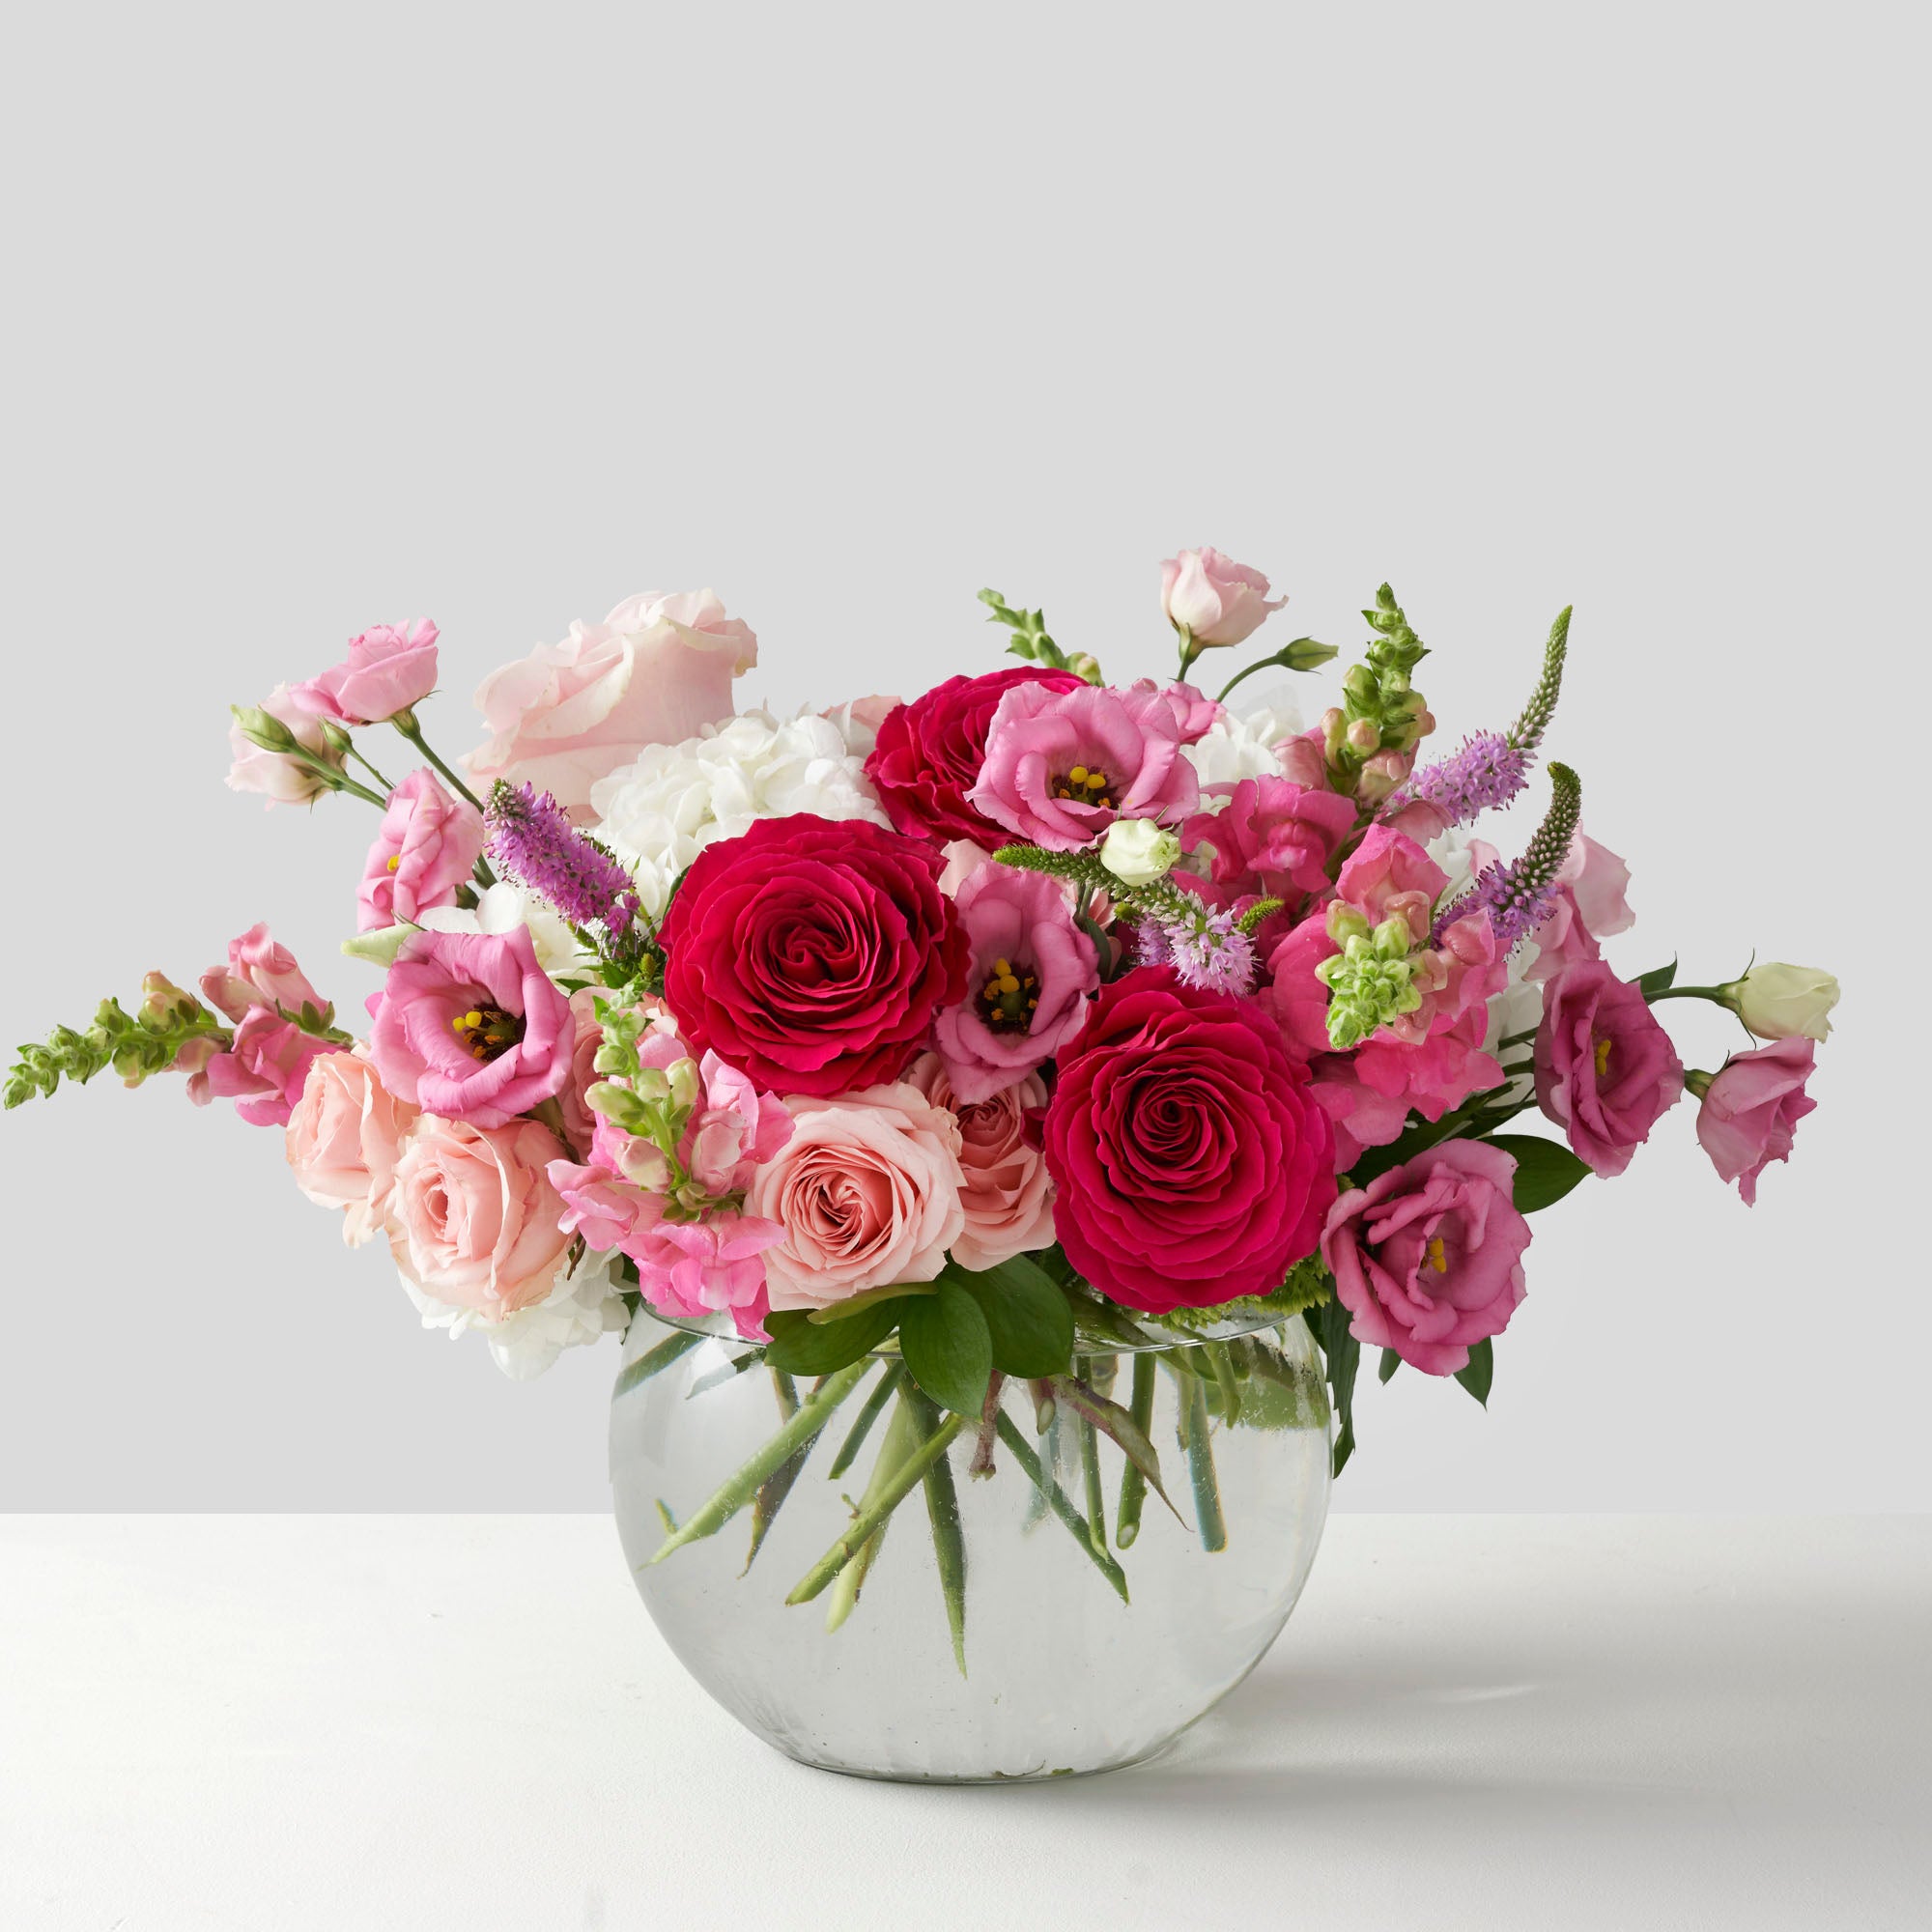 Arrangement of pink flowers in clear glass rosebowl, centered on white background.